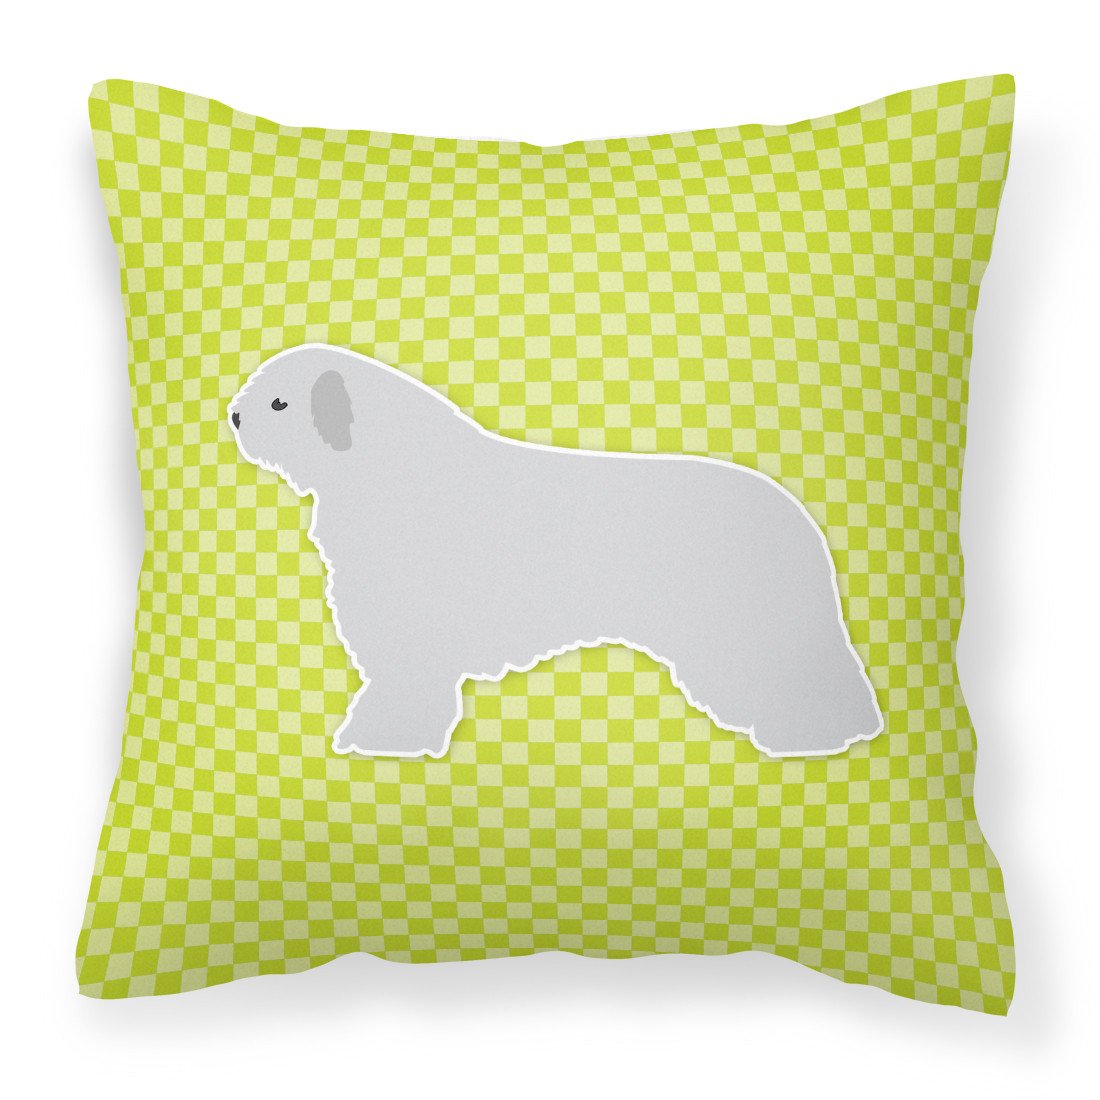 Spanish Water Dog Checkerboard Green Fabric Decorative Pillow BB3815PW1818 by Caroline's Treasures